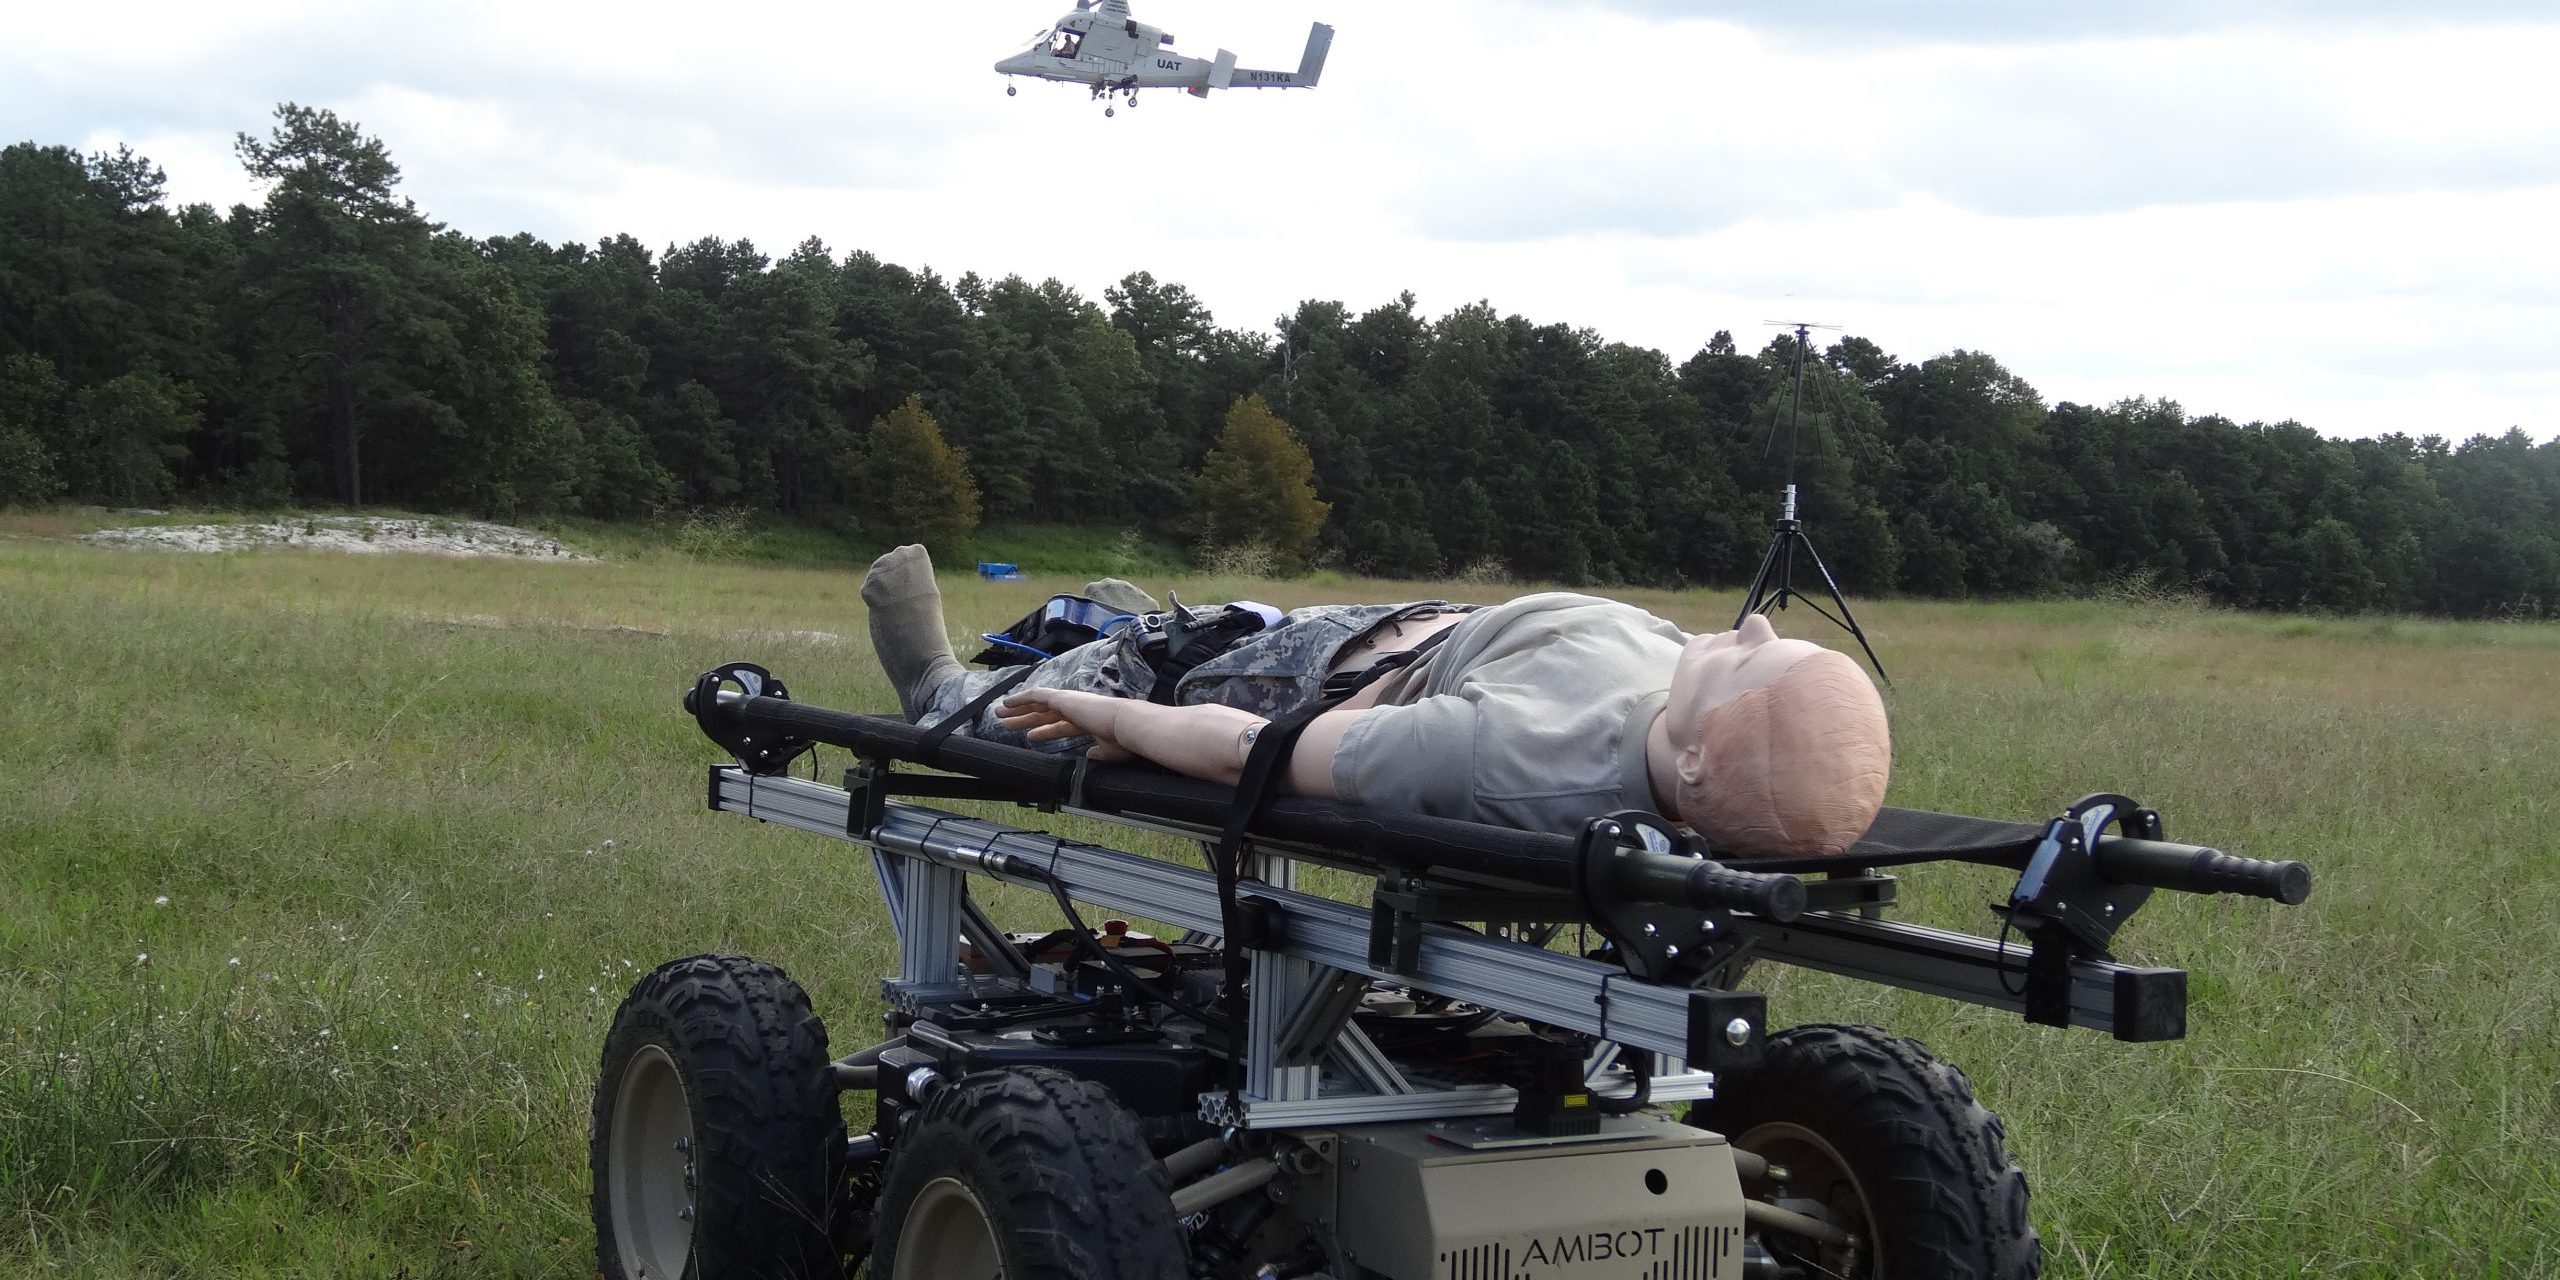 The Navy, Army and Air Force conduct a casualty evacuation (CASEVAC) response event at Fort Dix, N.J. in August 2016. The Navy tested its common control system during the event to show the potential use of unmanned systems for automated CASEVACs. (U.S. Army photo)